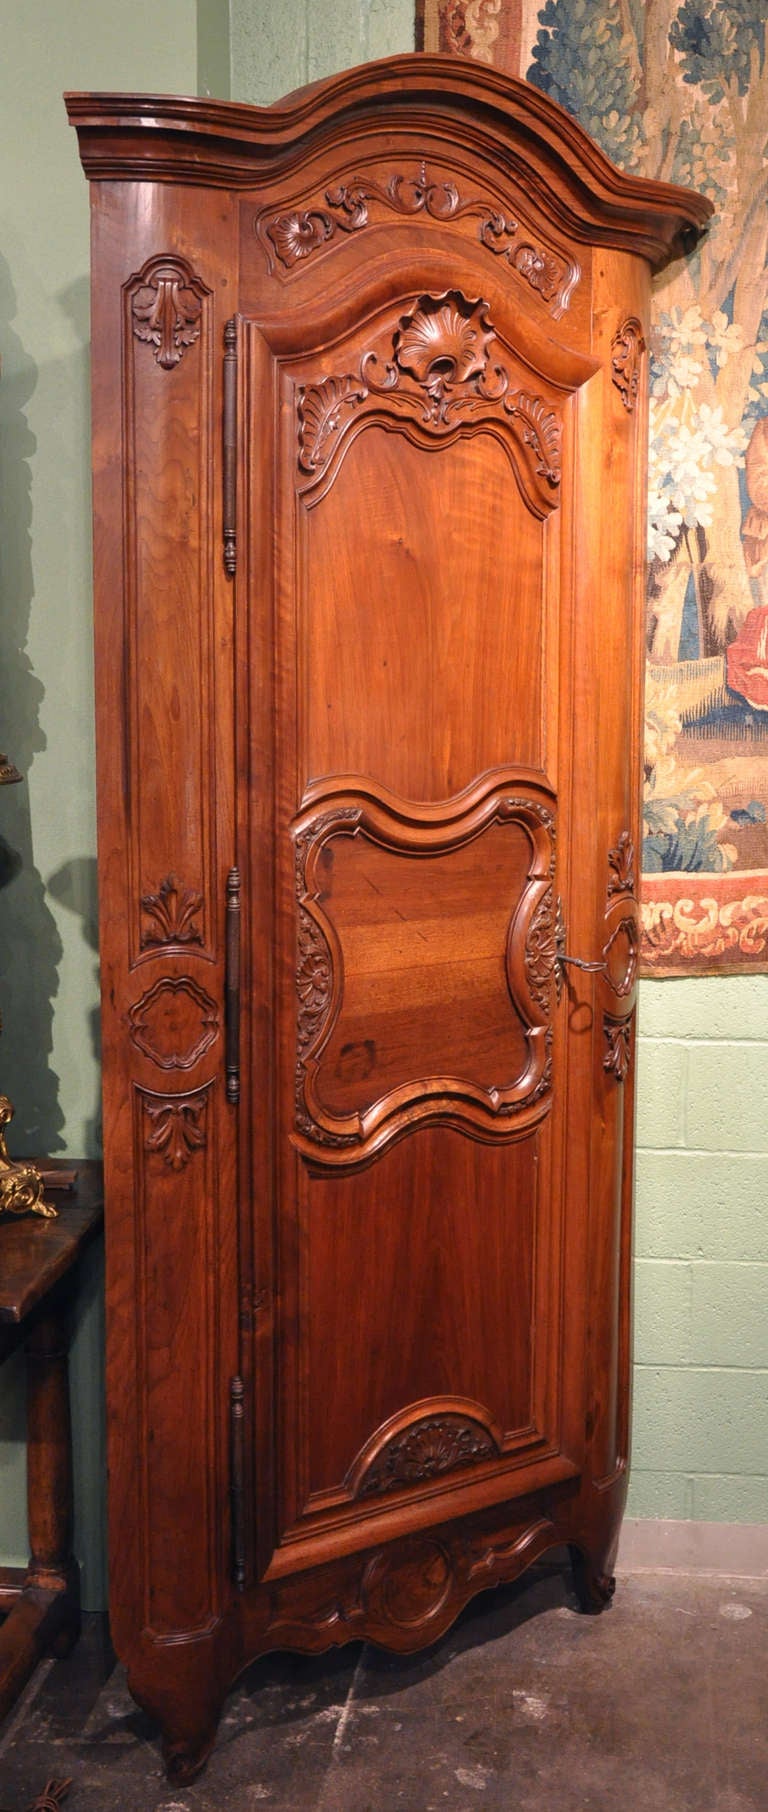 Pair of Large French Corner Cabinets from Lyon.  Composed of walnut, these exquisitely crafted, sturdy cabinets feature arched doors, beautiful carving, and stationary shelving. Original iron hinges and locks with keys.